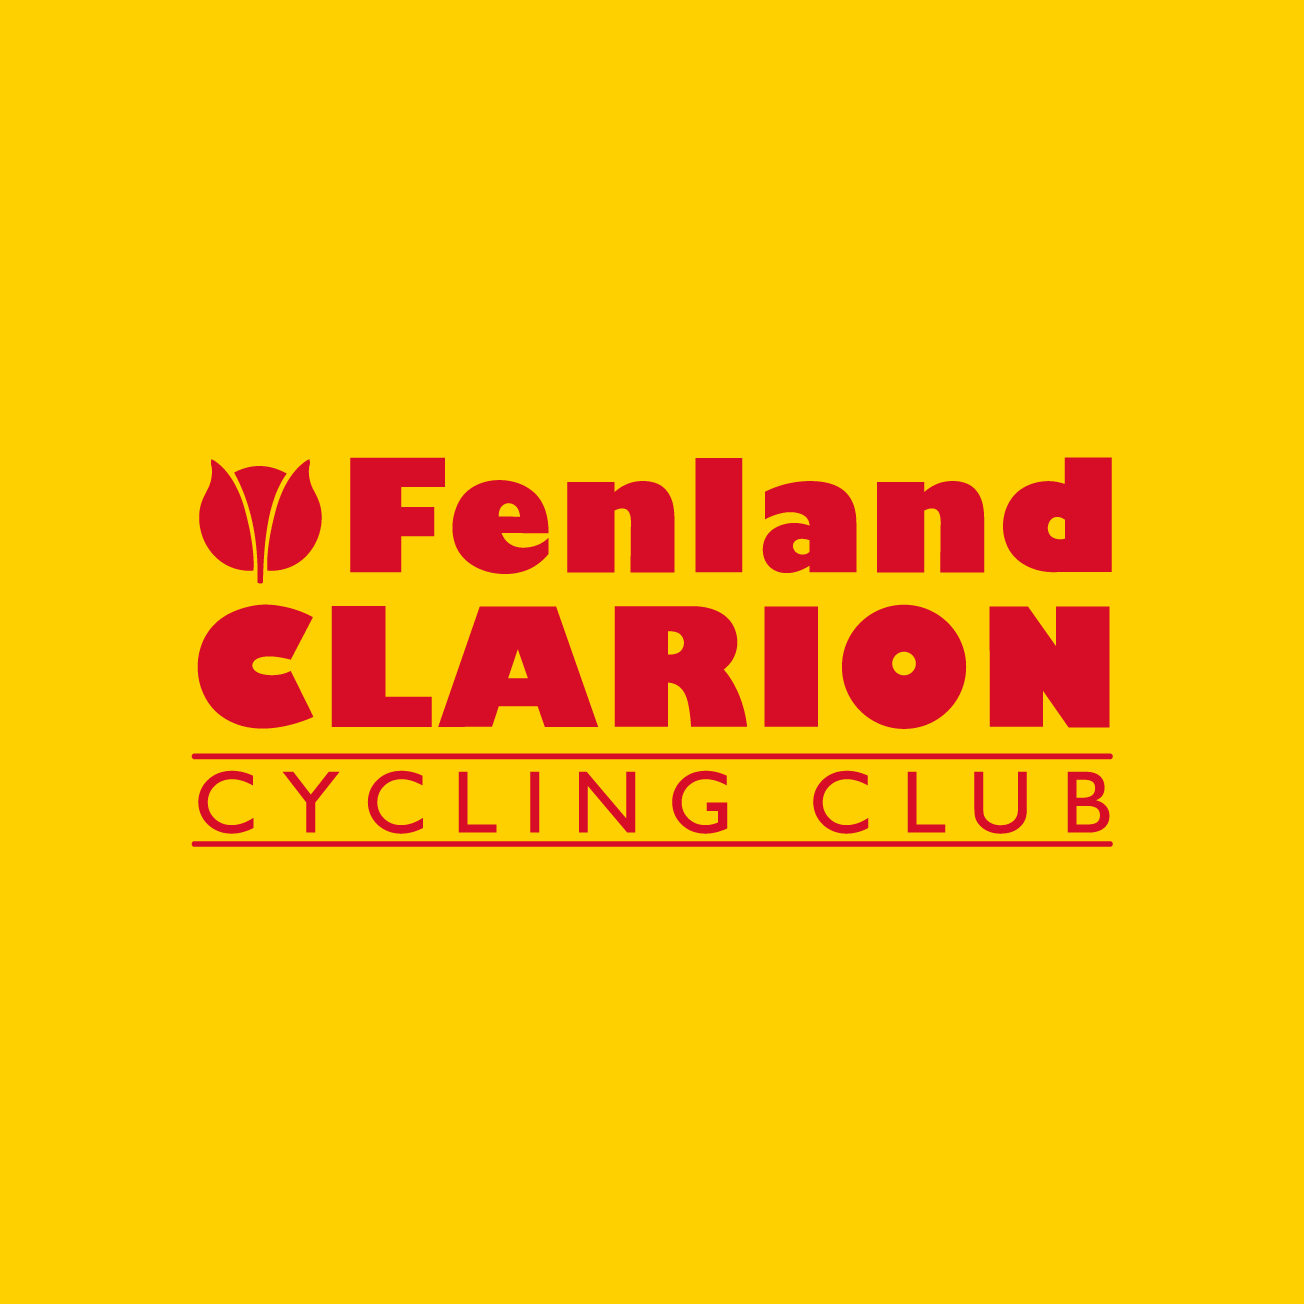 Club Image for FENLAND CLARION